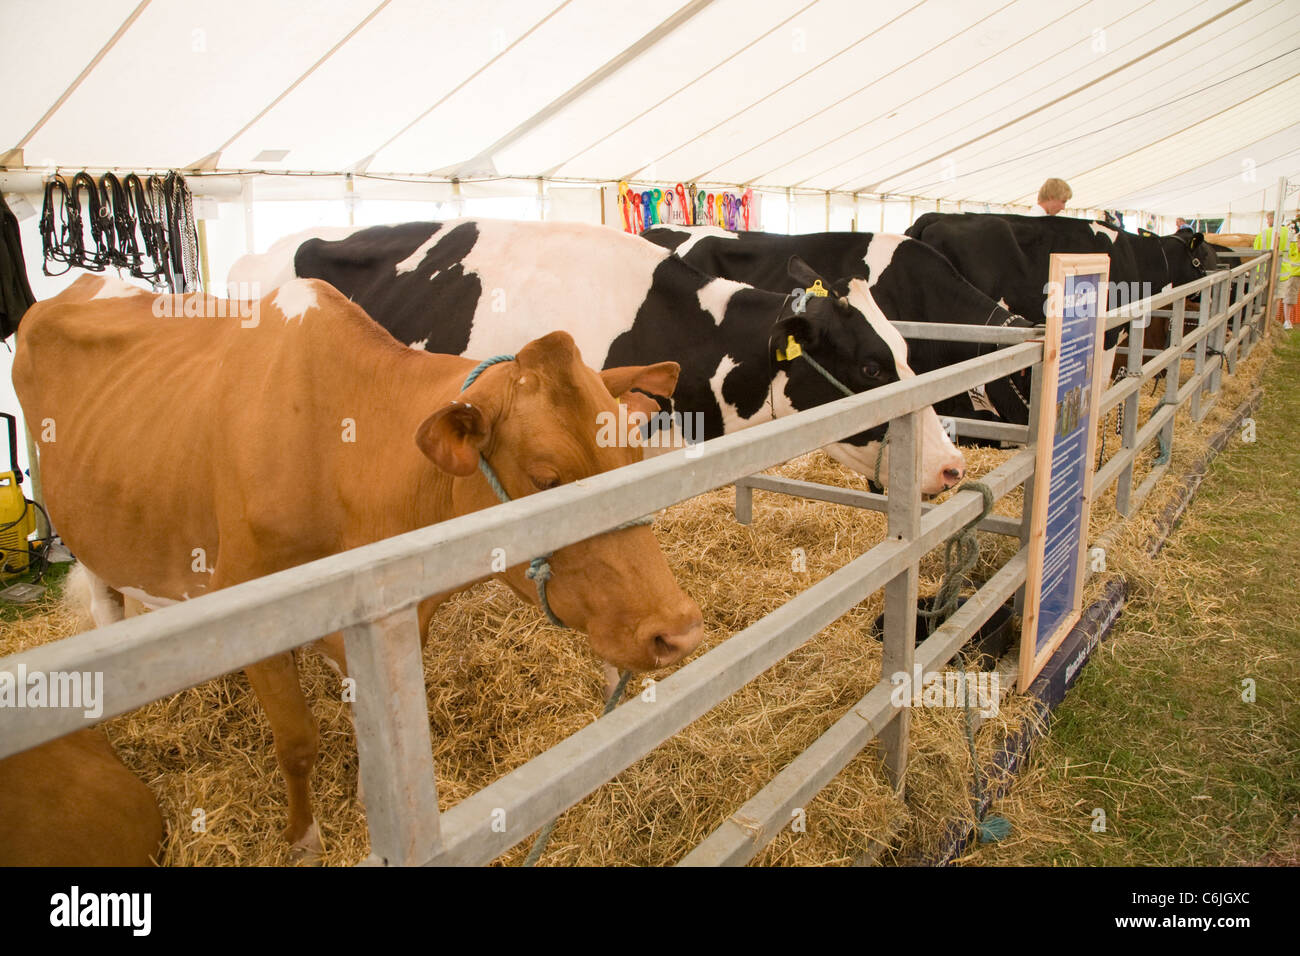 Cattle tent at the New Forest Show 2011, Hampshire, England Stock Photo